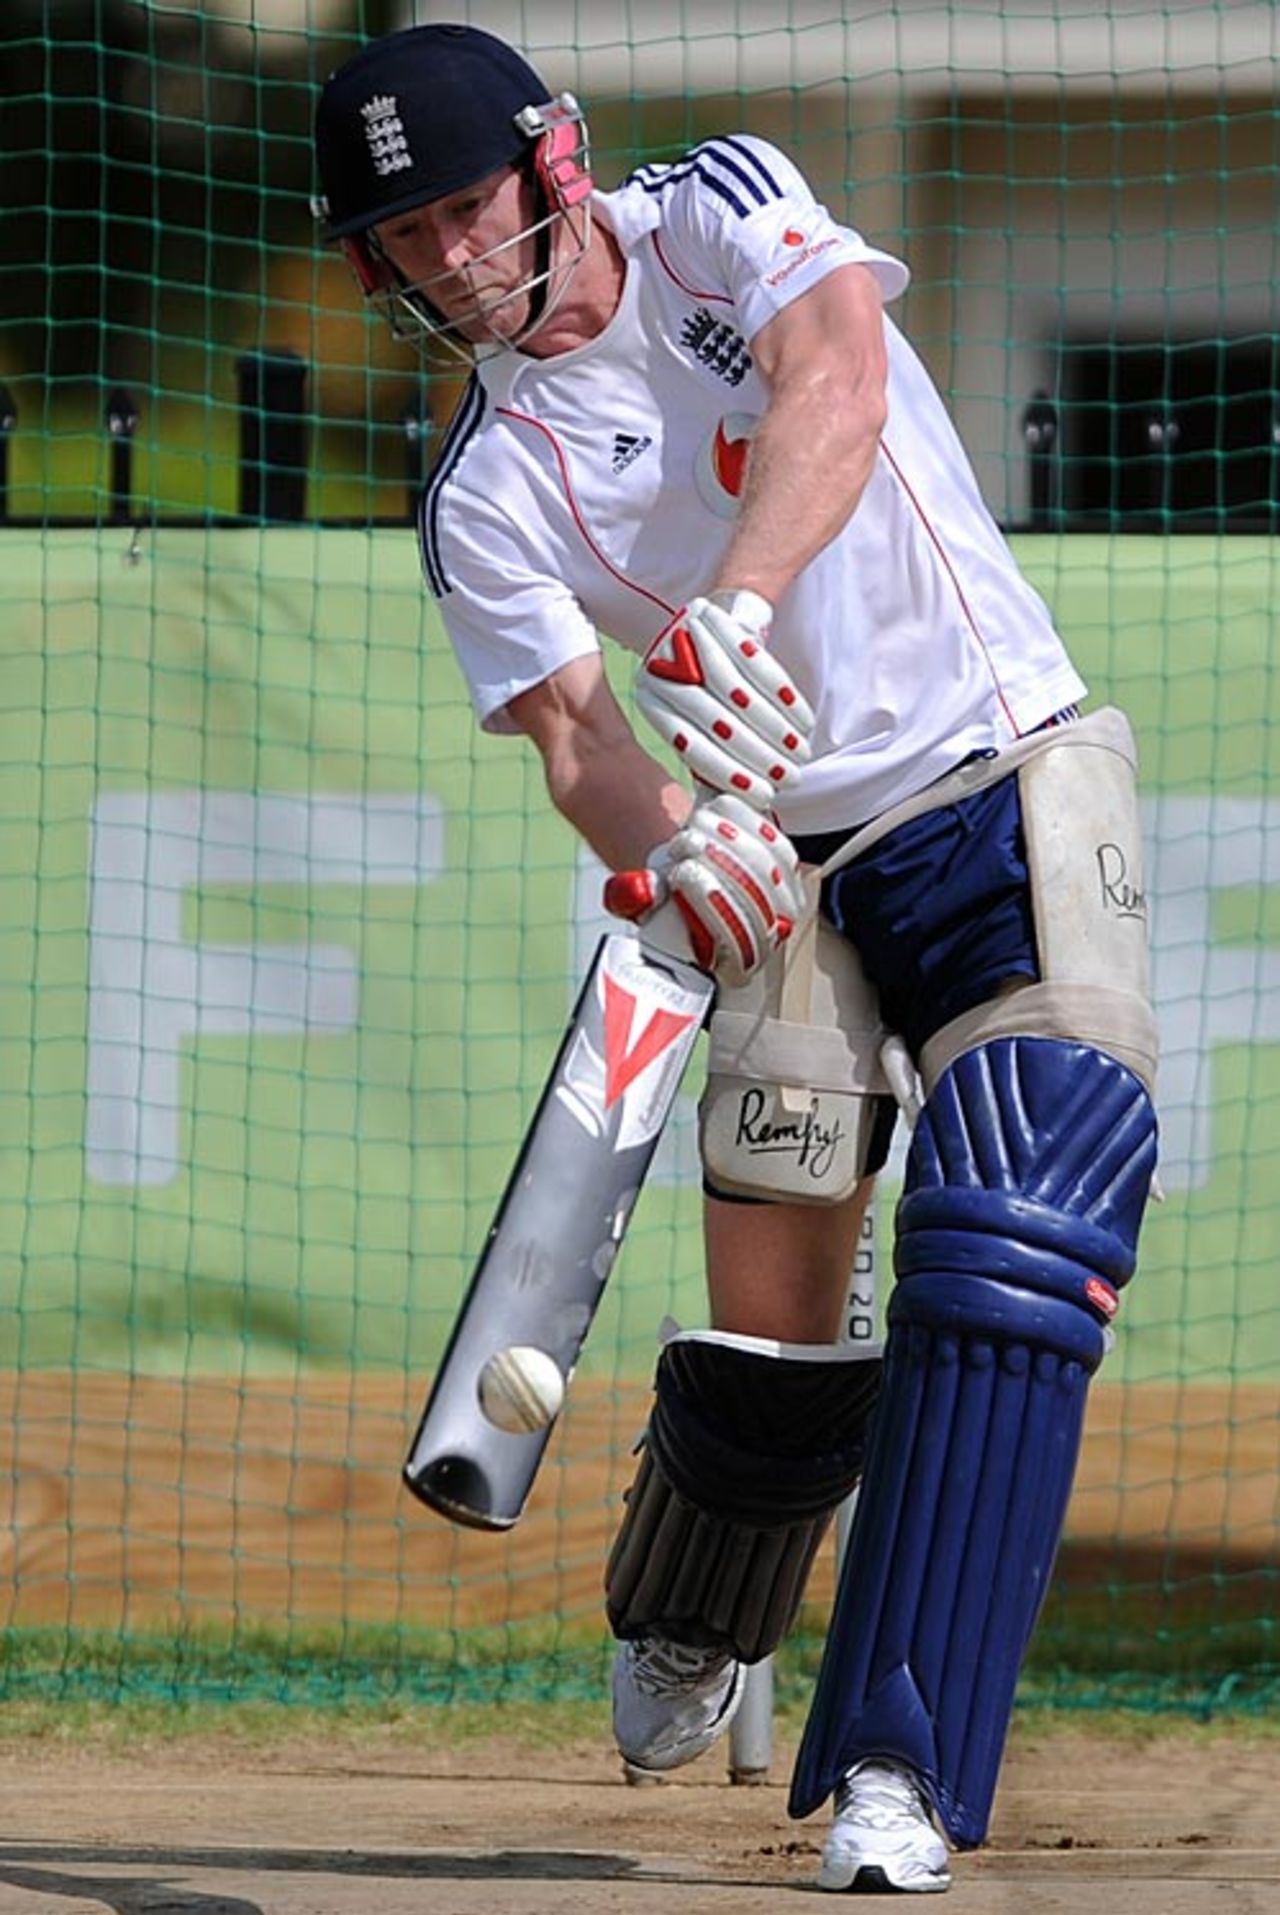 Paul Collingwood cuts loose, Stanford 20/20 for 20, Antigua, October 31, 2008